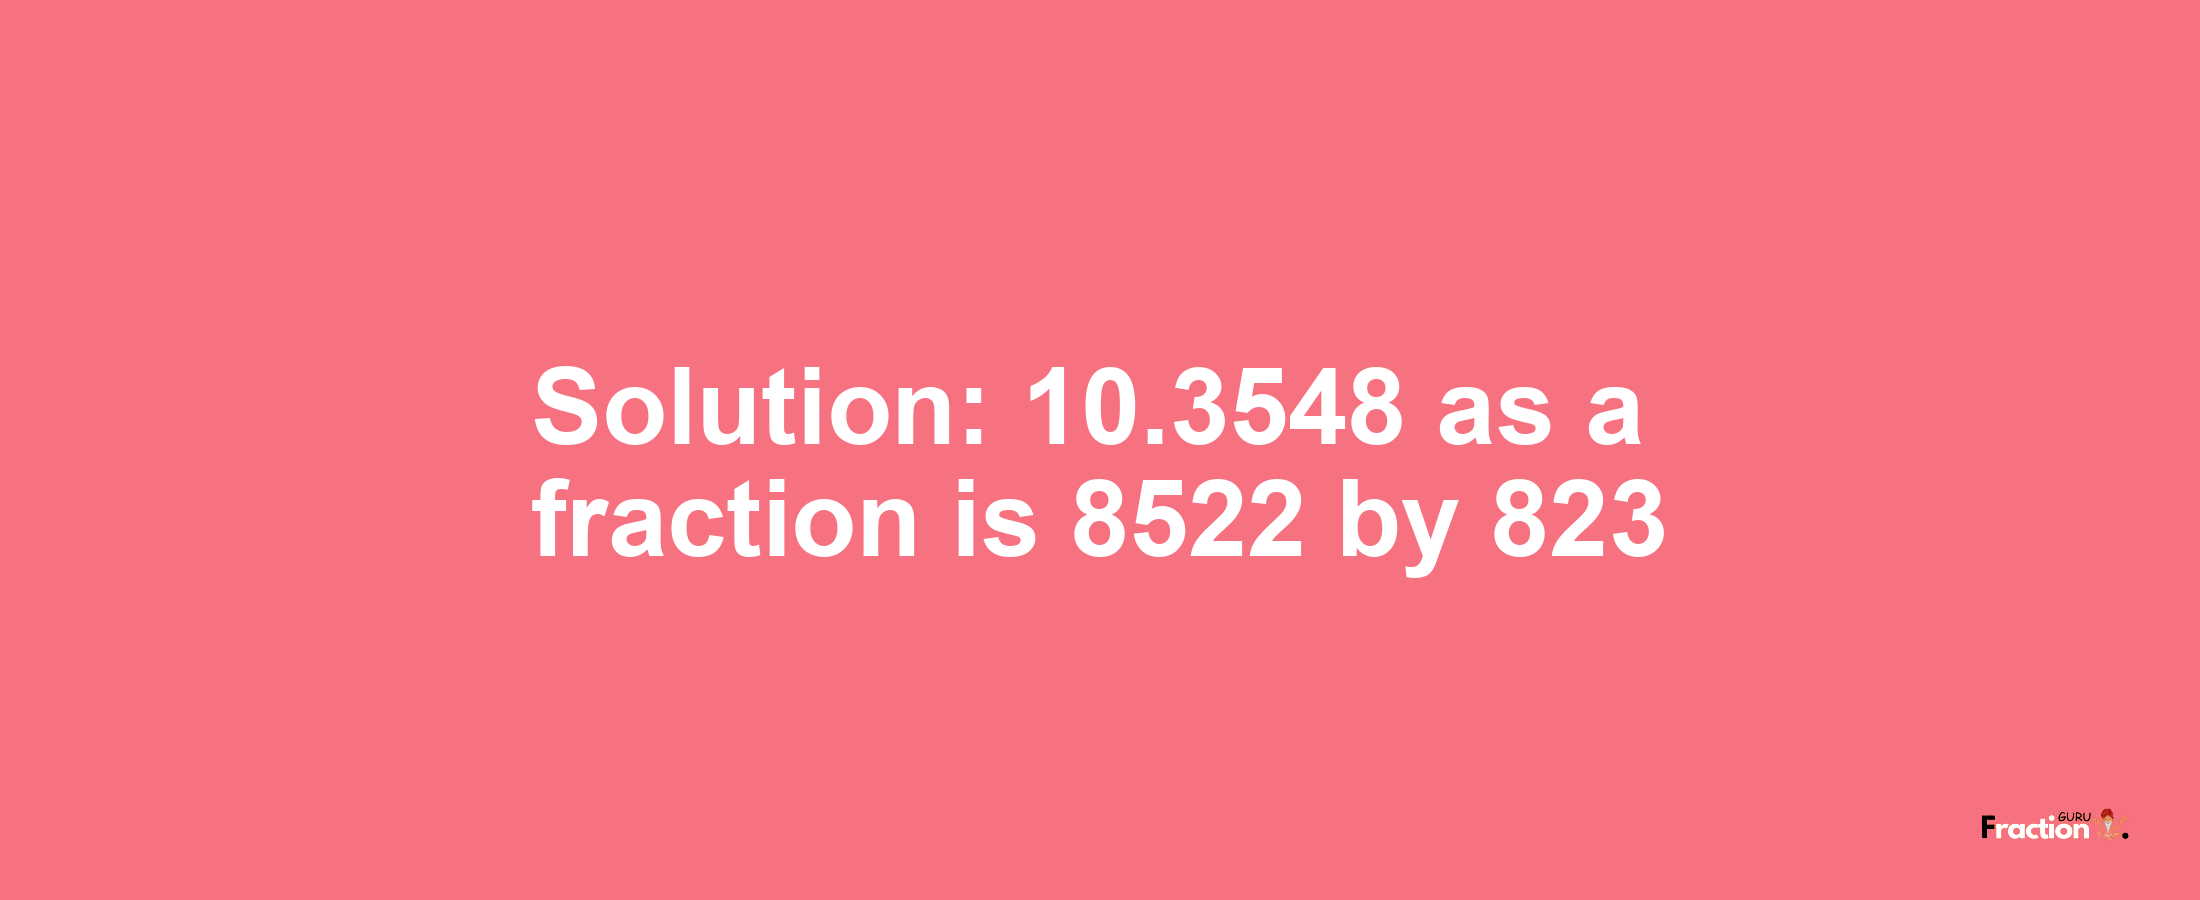 Solution:10.3548 as a fraction is 8522/823